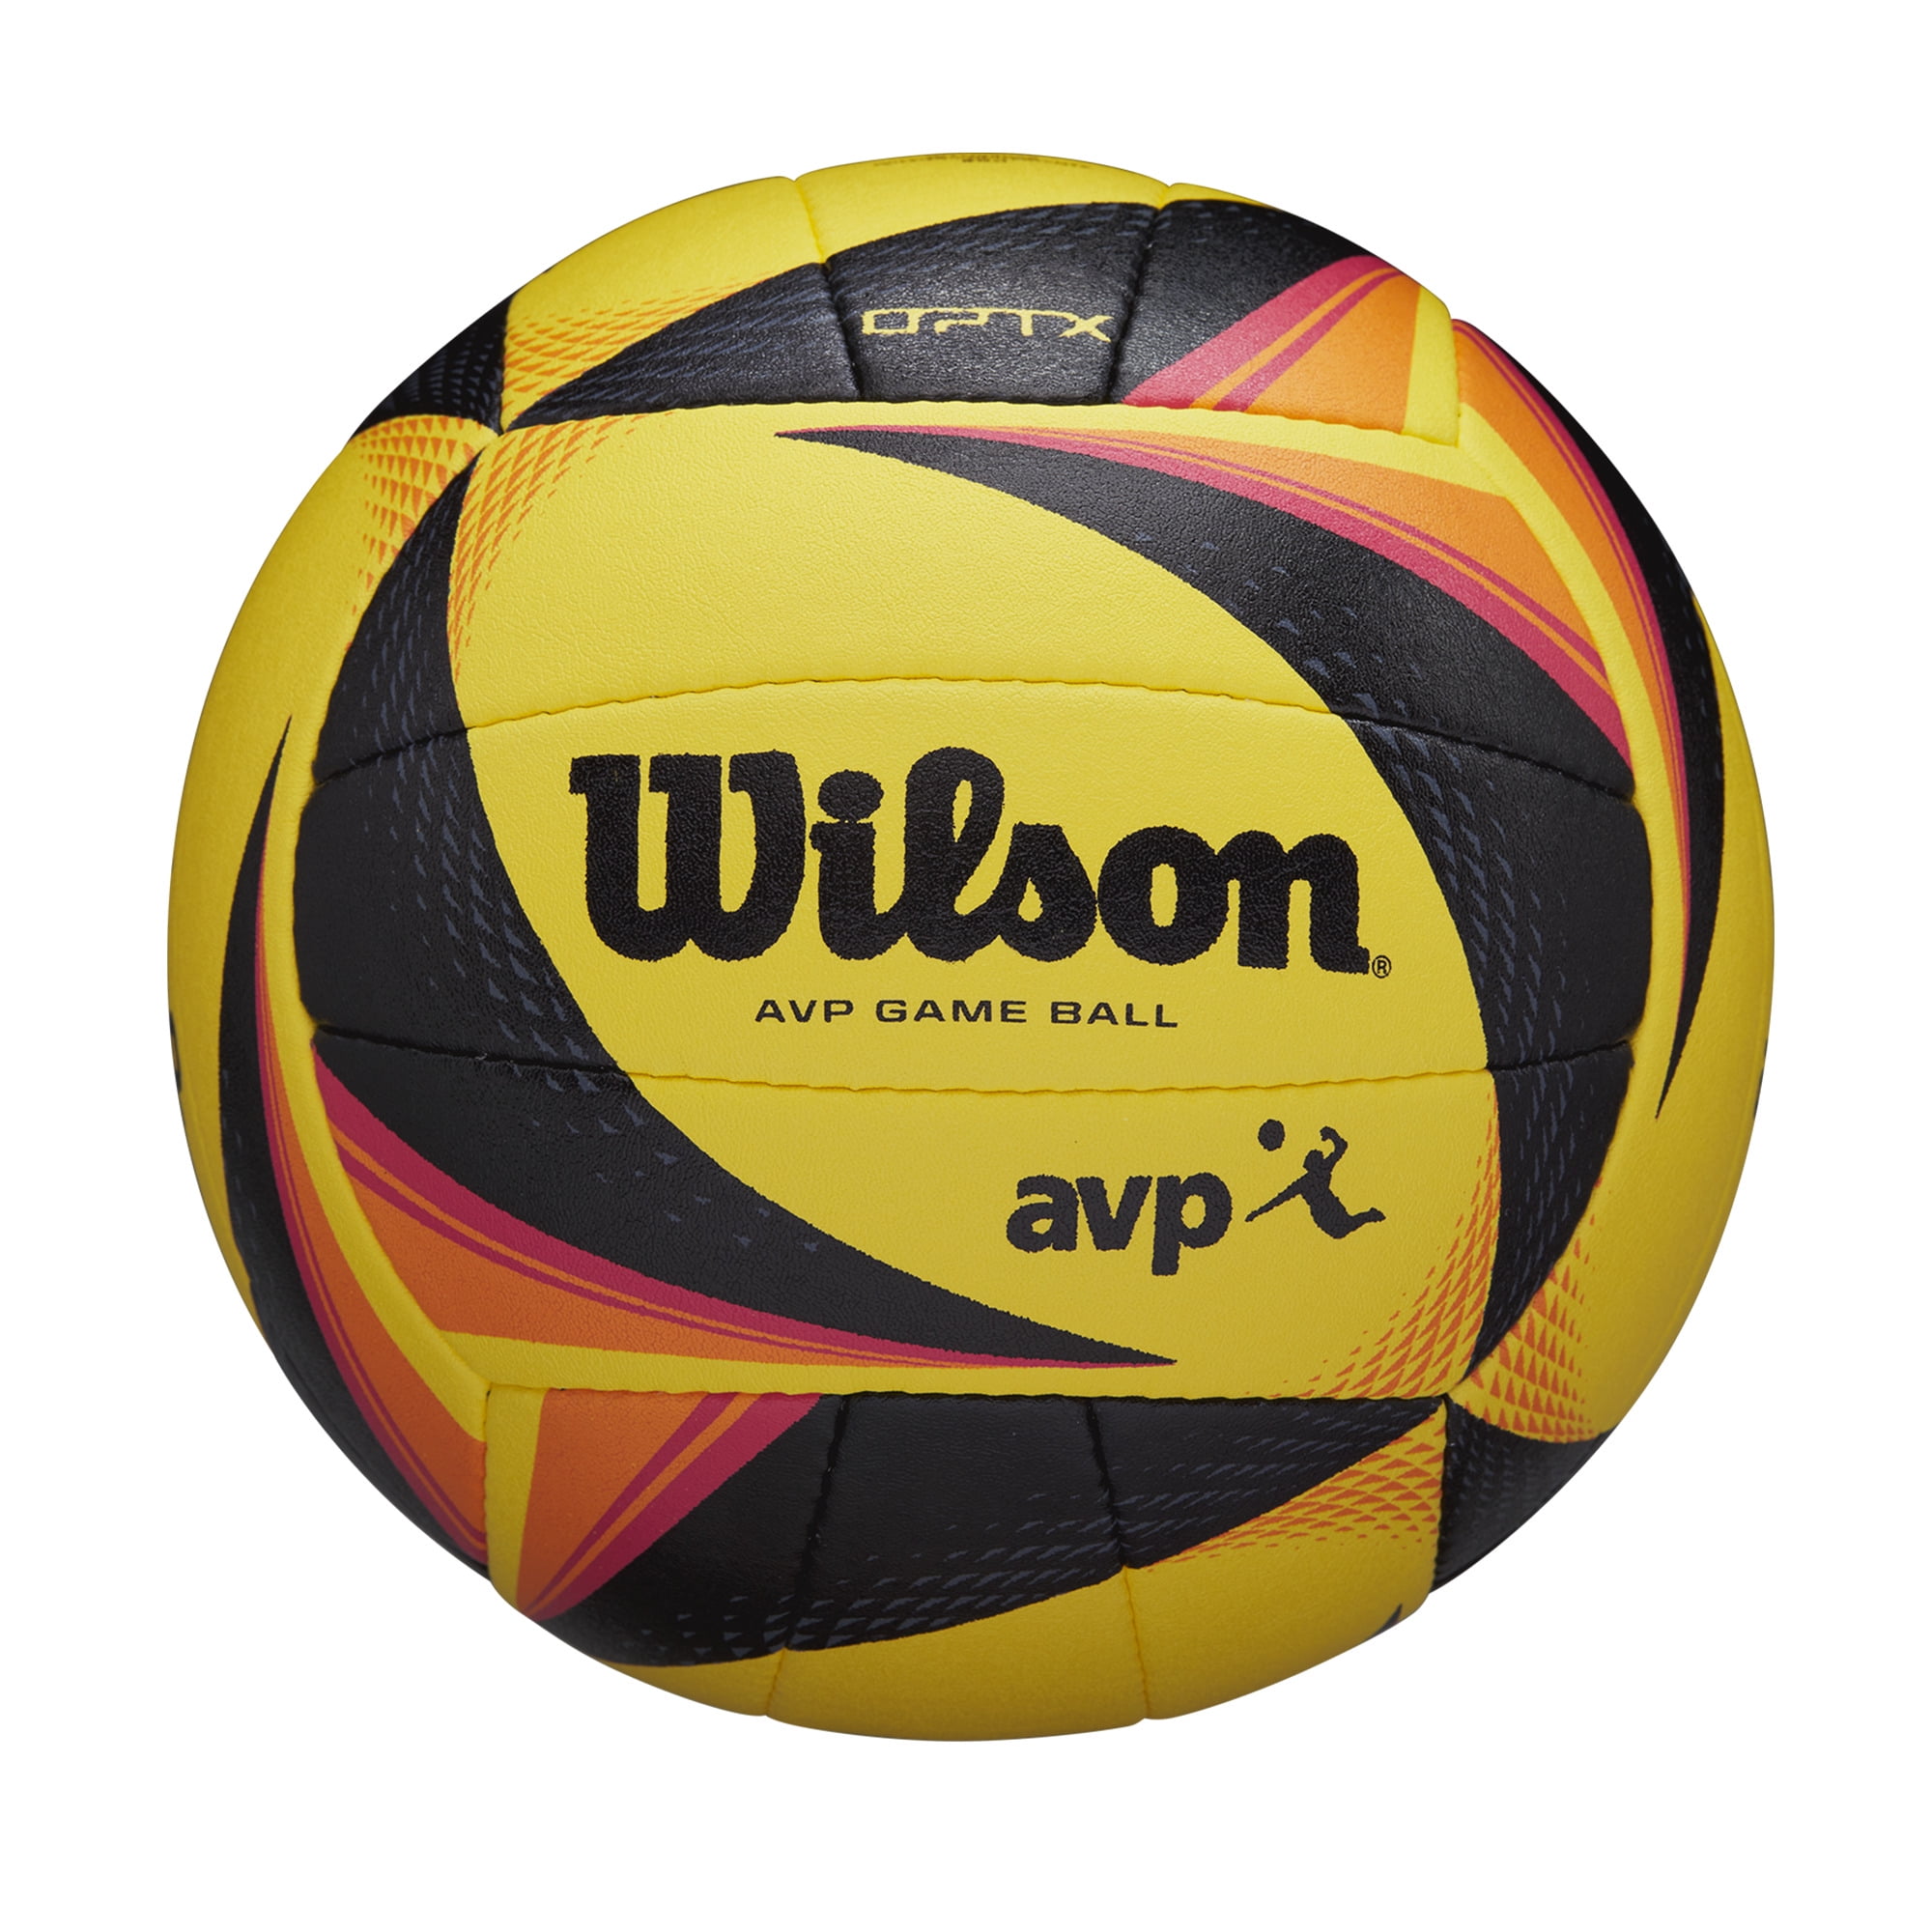 Tachikara Institutional quality Composite VolleyBall Black-White Note 